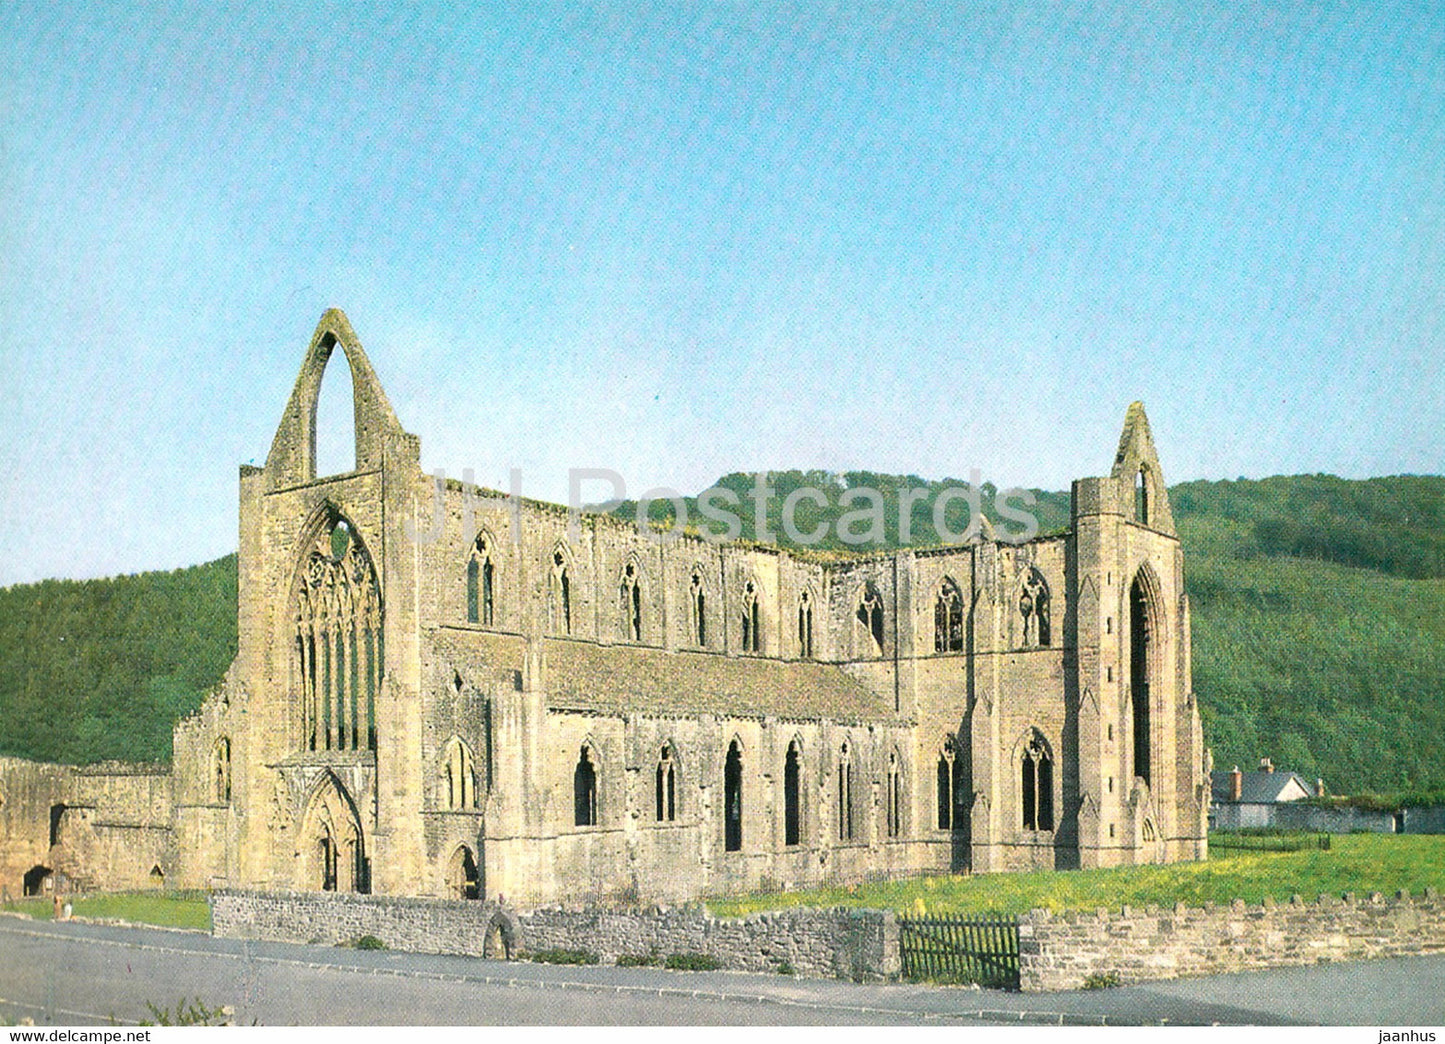 Tintern Abbey - Gwent - View from South East - Wales - United Kingdom - unused - JH Postcards